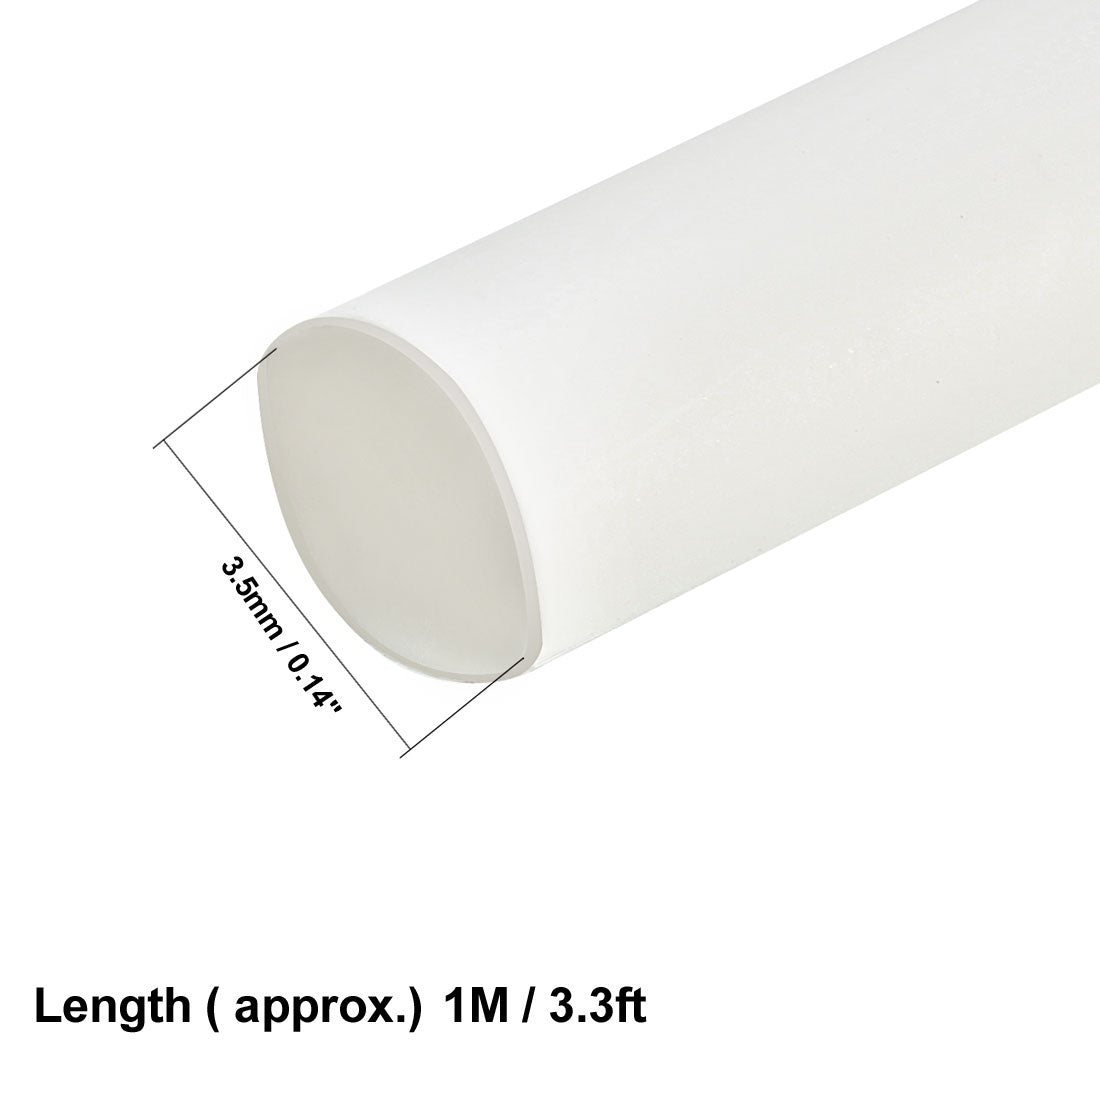 uxcell Uxcell Heat Shrink Tube 2:1 Electrical Insulation Tube Wire Cable Tubing Sleeving Wrap White 3.5mm Diameter 1m Long